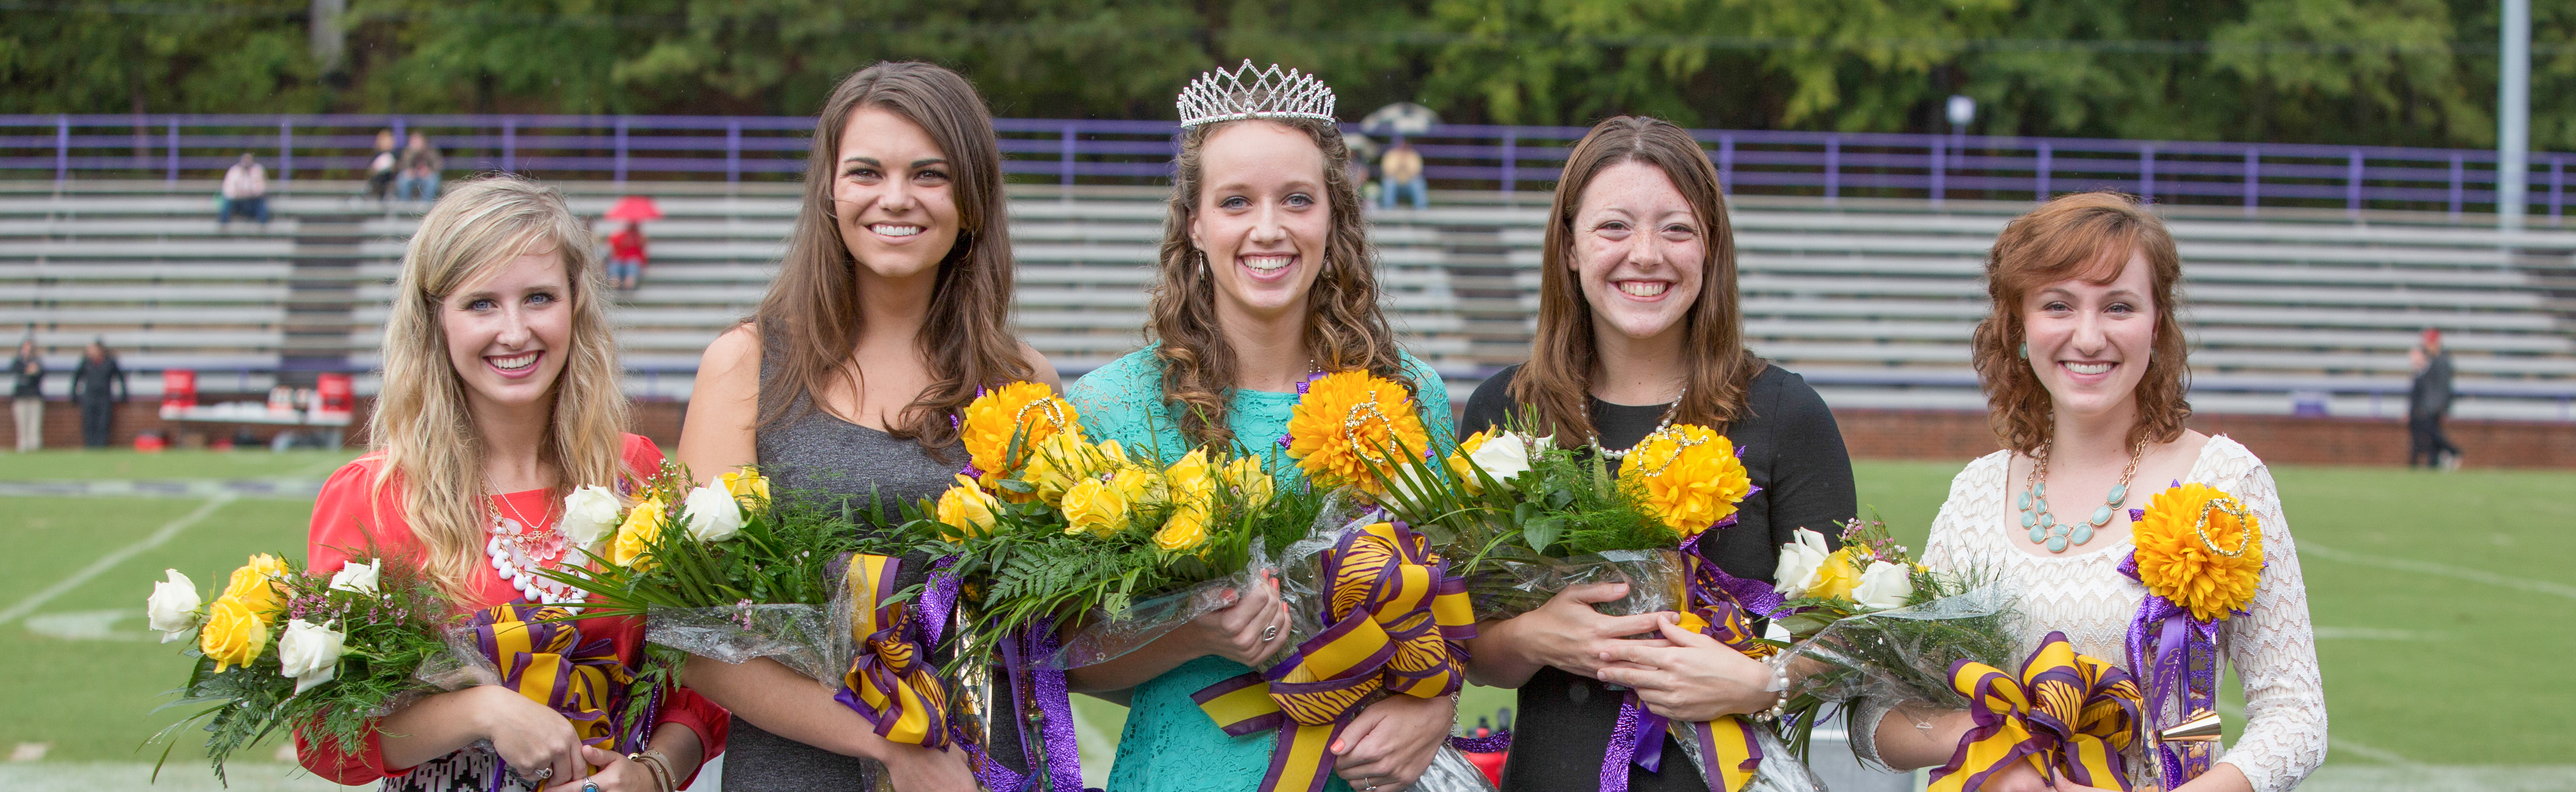 The 2013 Ouachita Homecoming Court includes (L-R): fourth runner-up Kristen Barnard, third runner-up Molly Bowman, Queen Kelsey Frink, second runner-up Lindsey Fowler and first runner-up Carli Sasser.